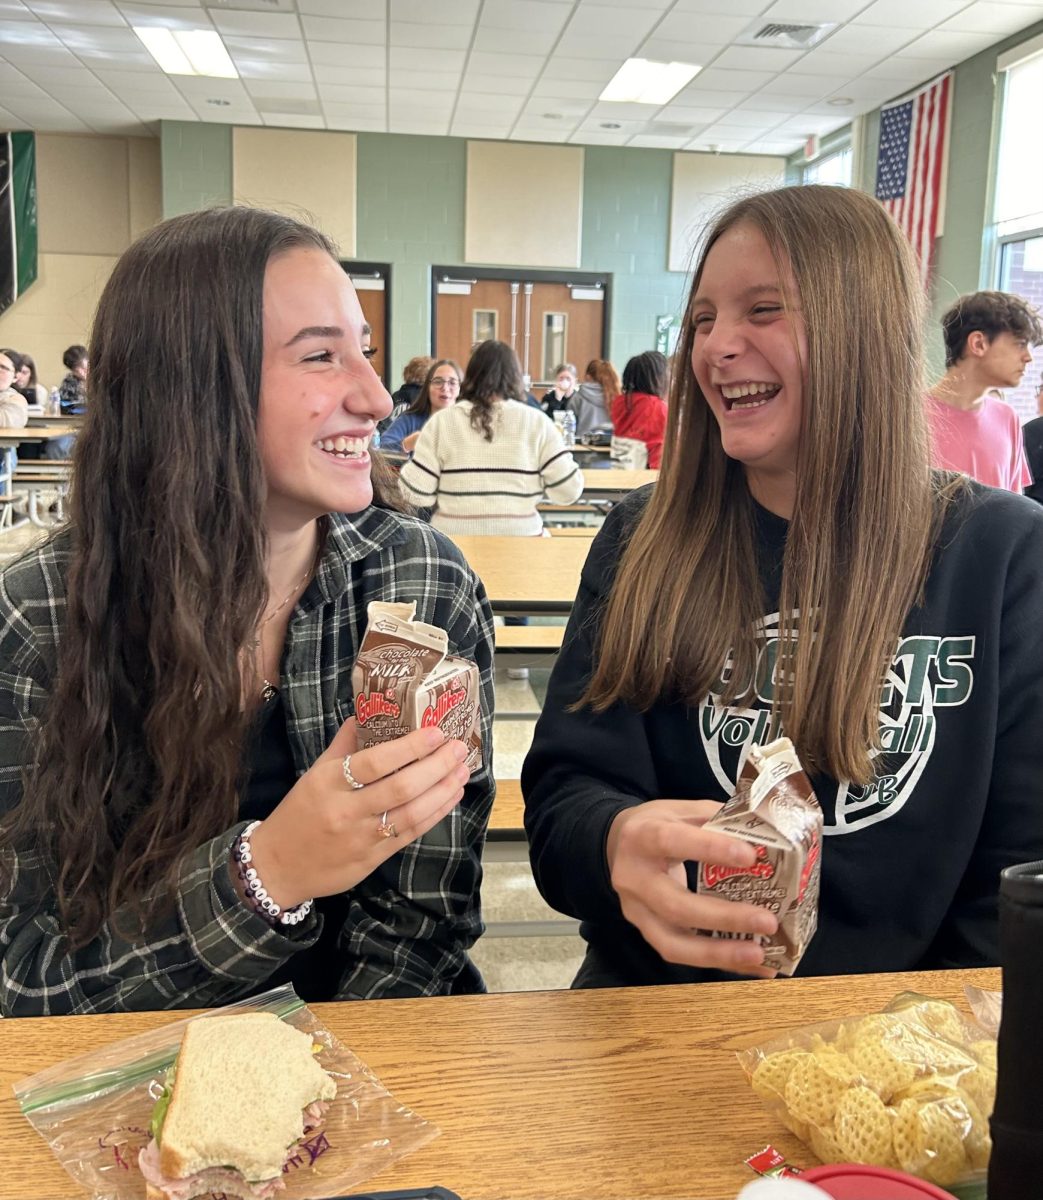 Cafeteria Delicacy
Sharing a laugh over lunch, Lilly Garbinski (10) and Ainsley Green (10) enjoy their chocolate milk out of a Galliker’s-made carton; a sought-after luxury during the milk carton shortage.